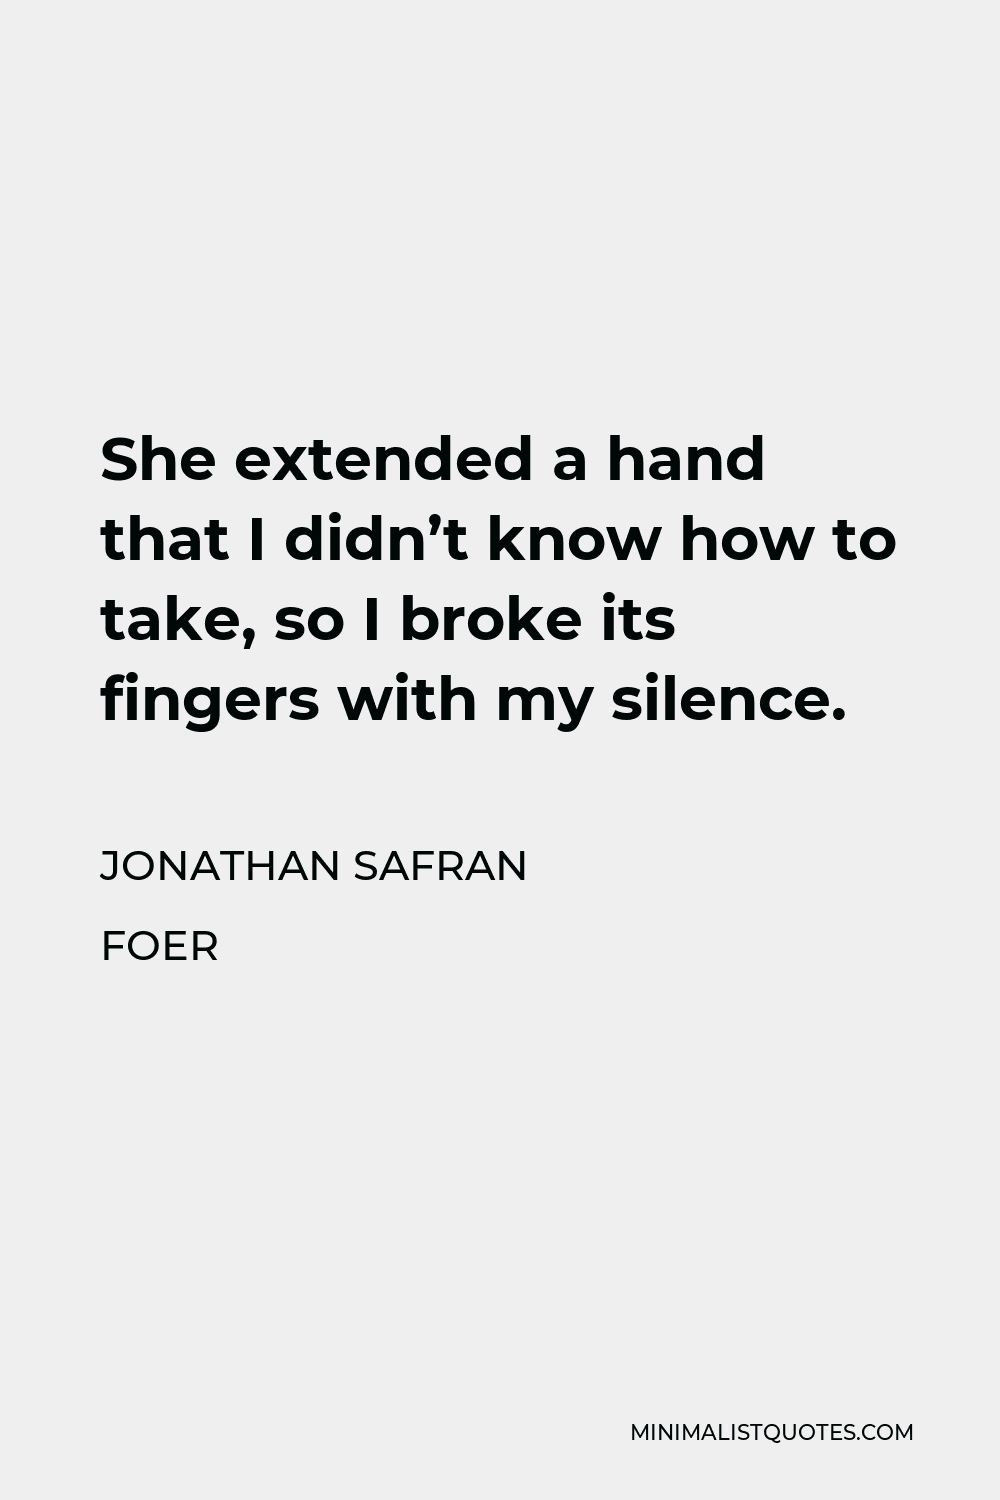 Jonathan Safran Foer Quote - She extended a hand that I didn’t know how to take, so I broke its fingers with my silence.